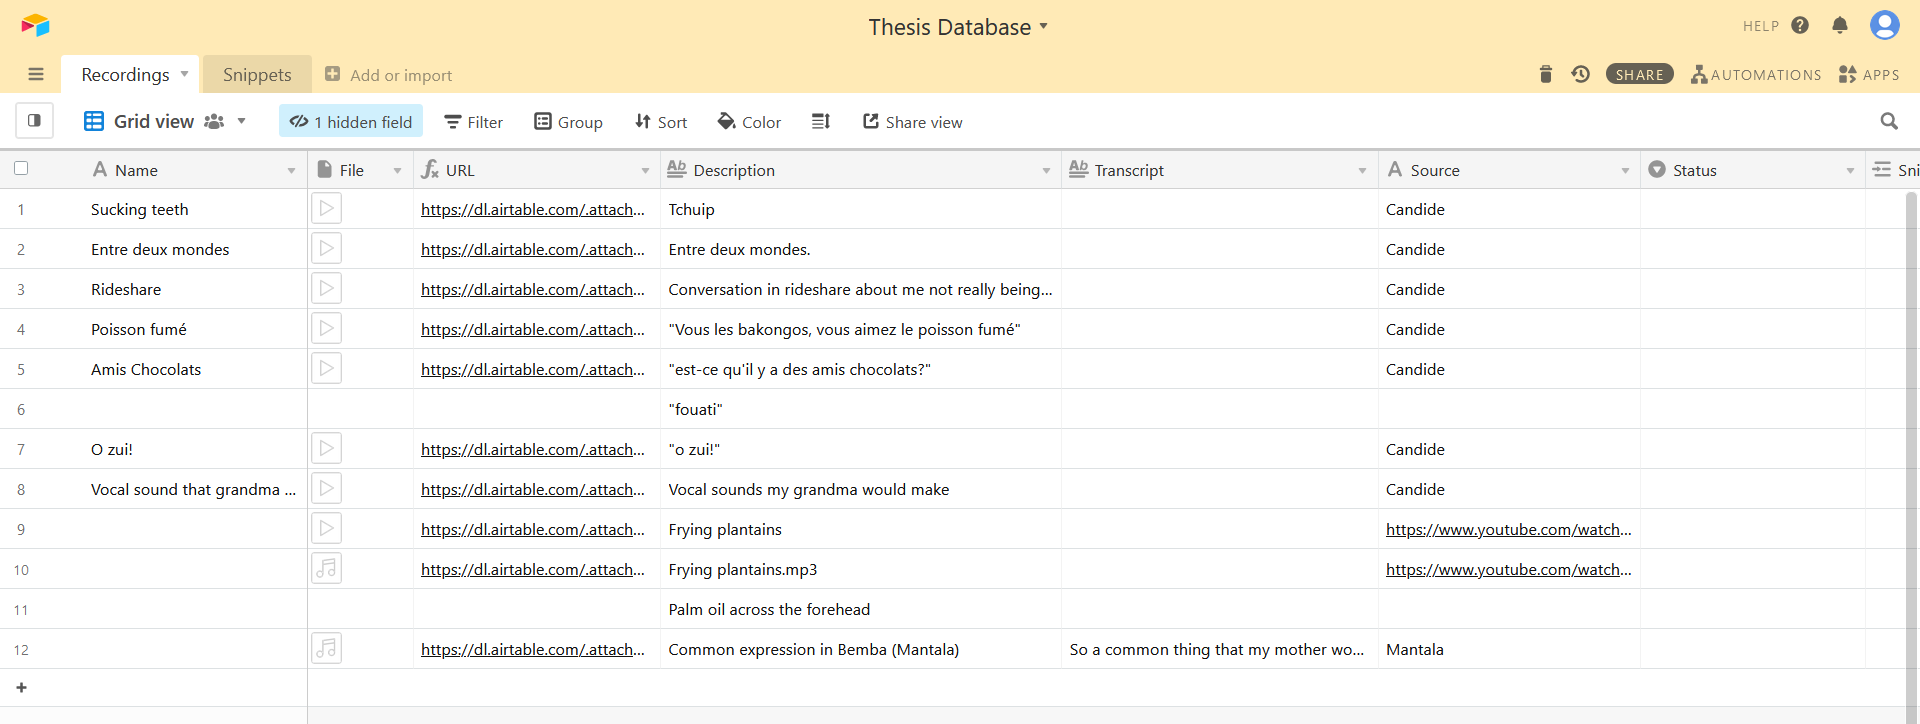 Thesis Audio Database on Airtable